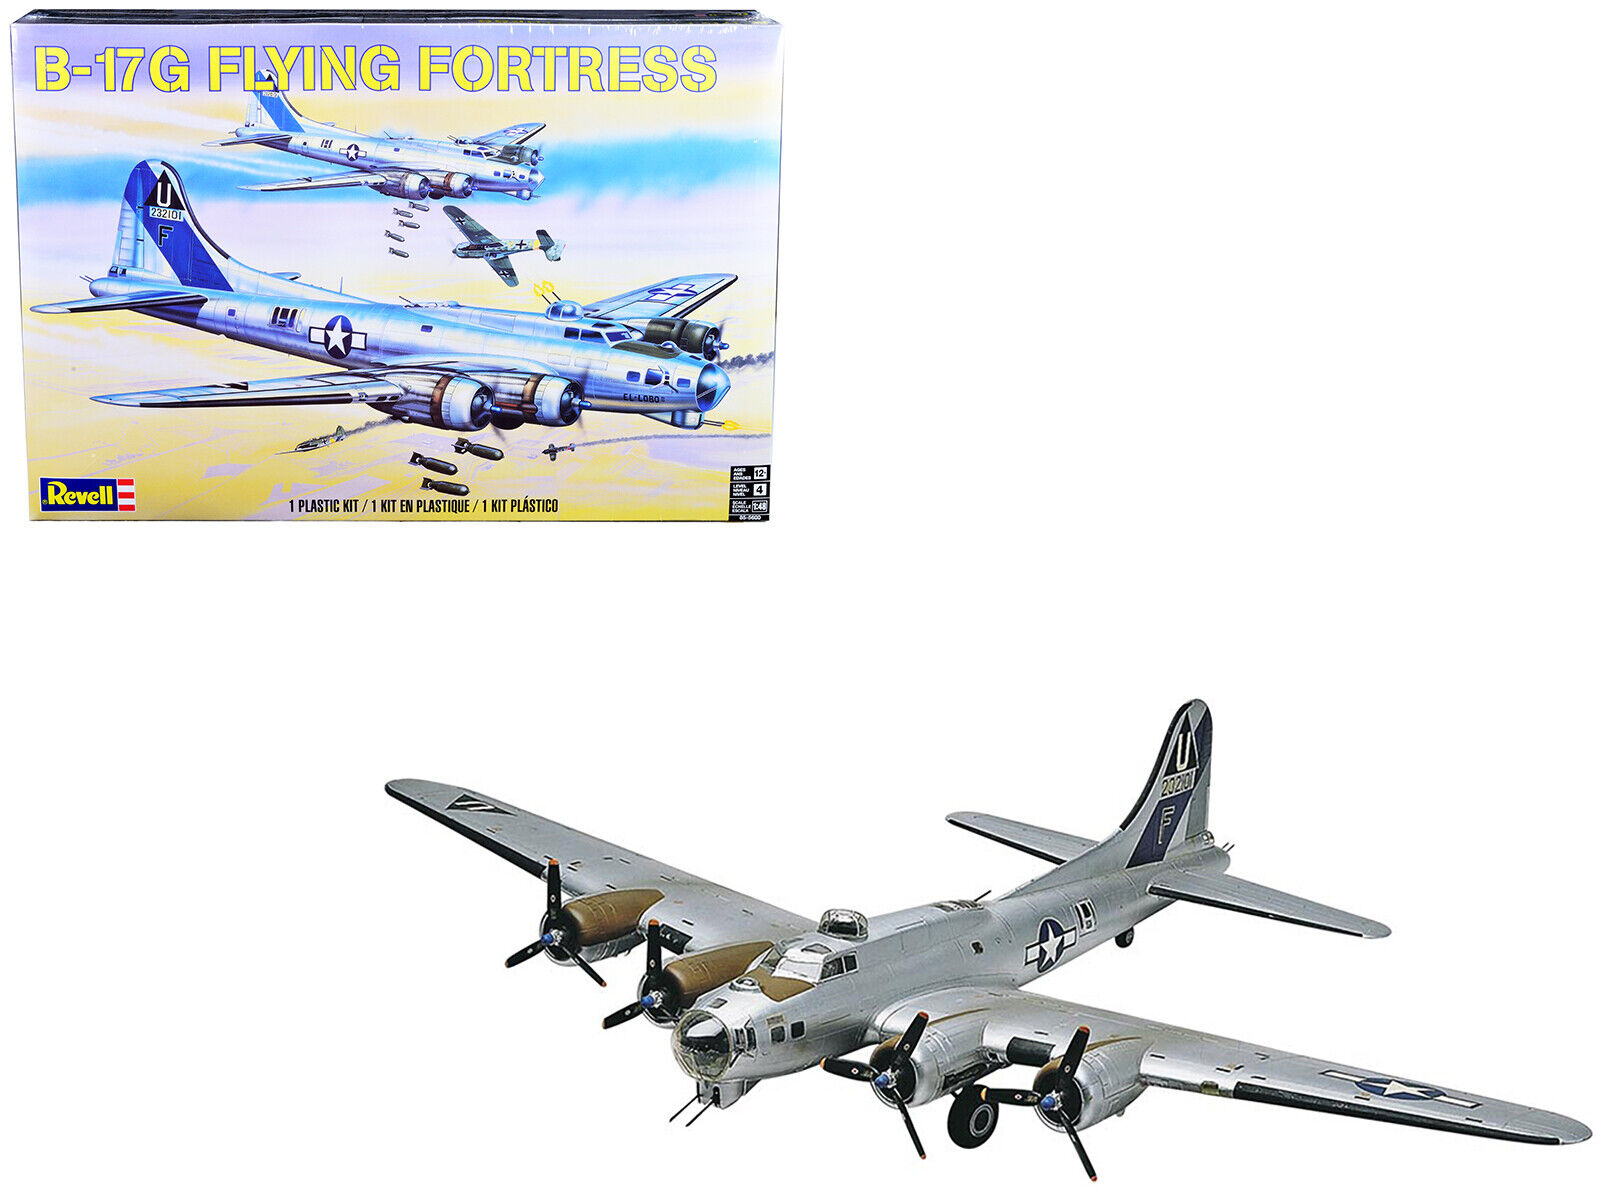 Level 4 Model Kit Boeing B17-G Flying Fortress Bomber Aircraft 1/48 Scale Model